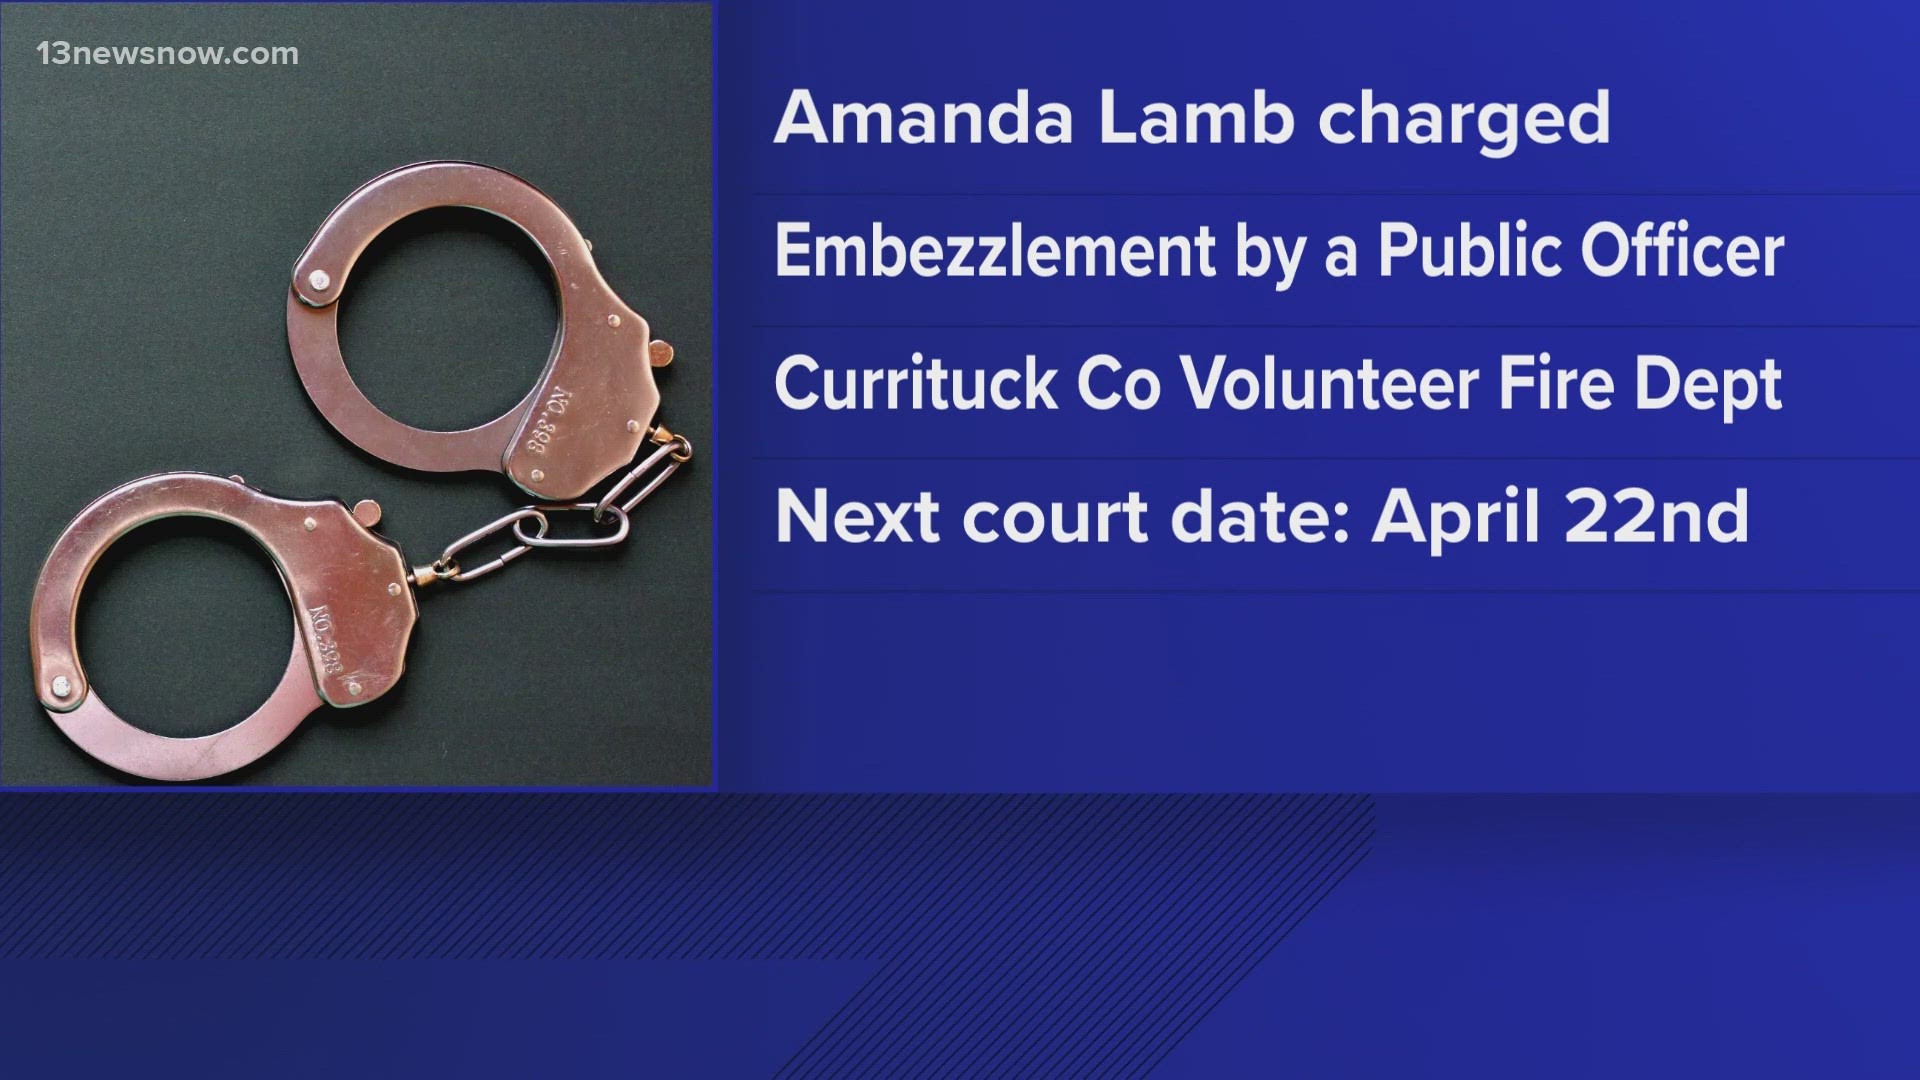 A Currituck County Fire employee has been accused of embezzling more than $200 thousand dollars from the Volunteer Fire Department.